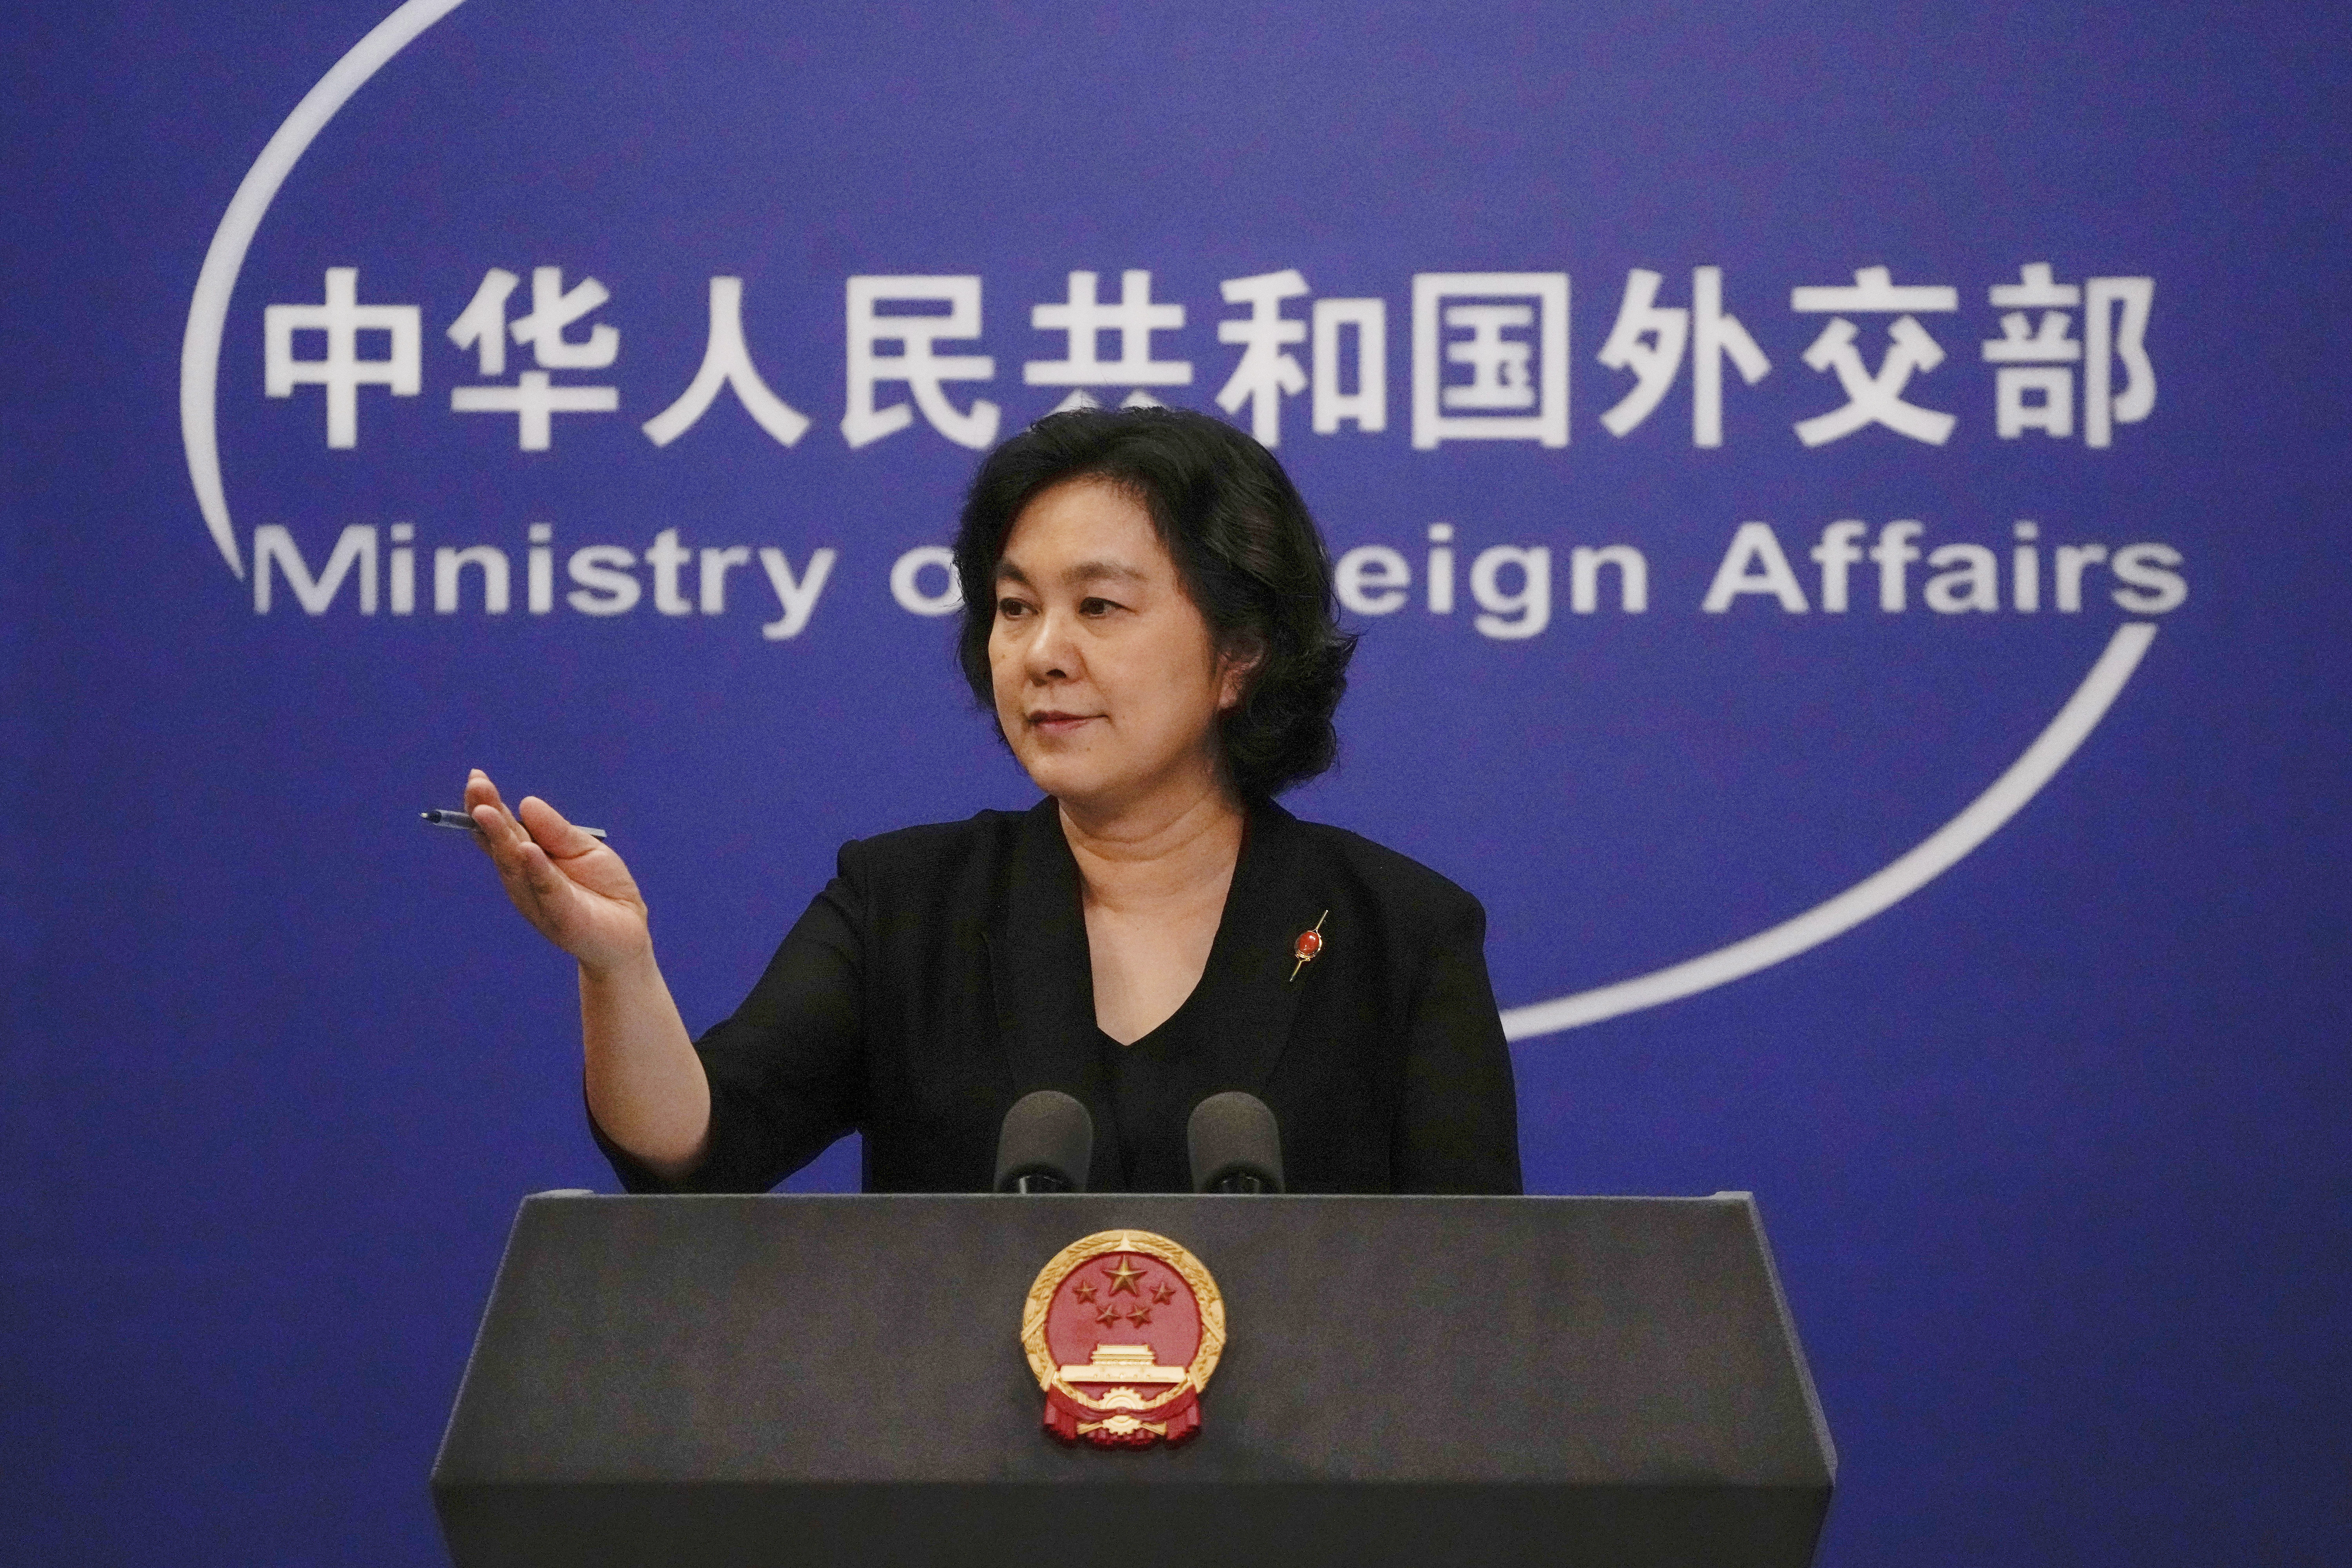 Chinese Foreign Ministry spokeswoman Hua Chunying gestures during a daily briefing at the Ministry of Foreign Affairs office in Beijing, Wednesday, Aug. 3, 2022. After weeks of threatening rhetoric, China showed the spirit but stopped short of any direct military confrontation with the U.S. over the visit to Taiwan of a senior American politician, House Speaker Nancy Pelosi. (AP Photo/Andy Wong)